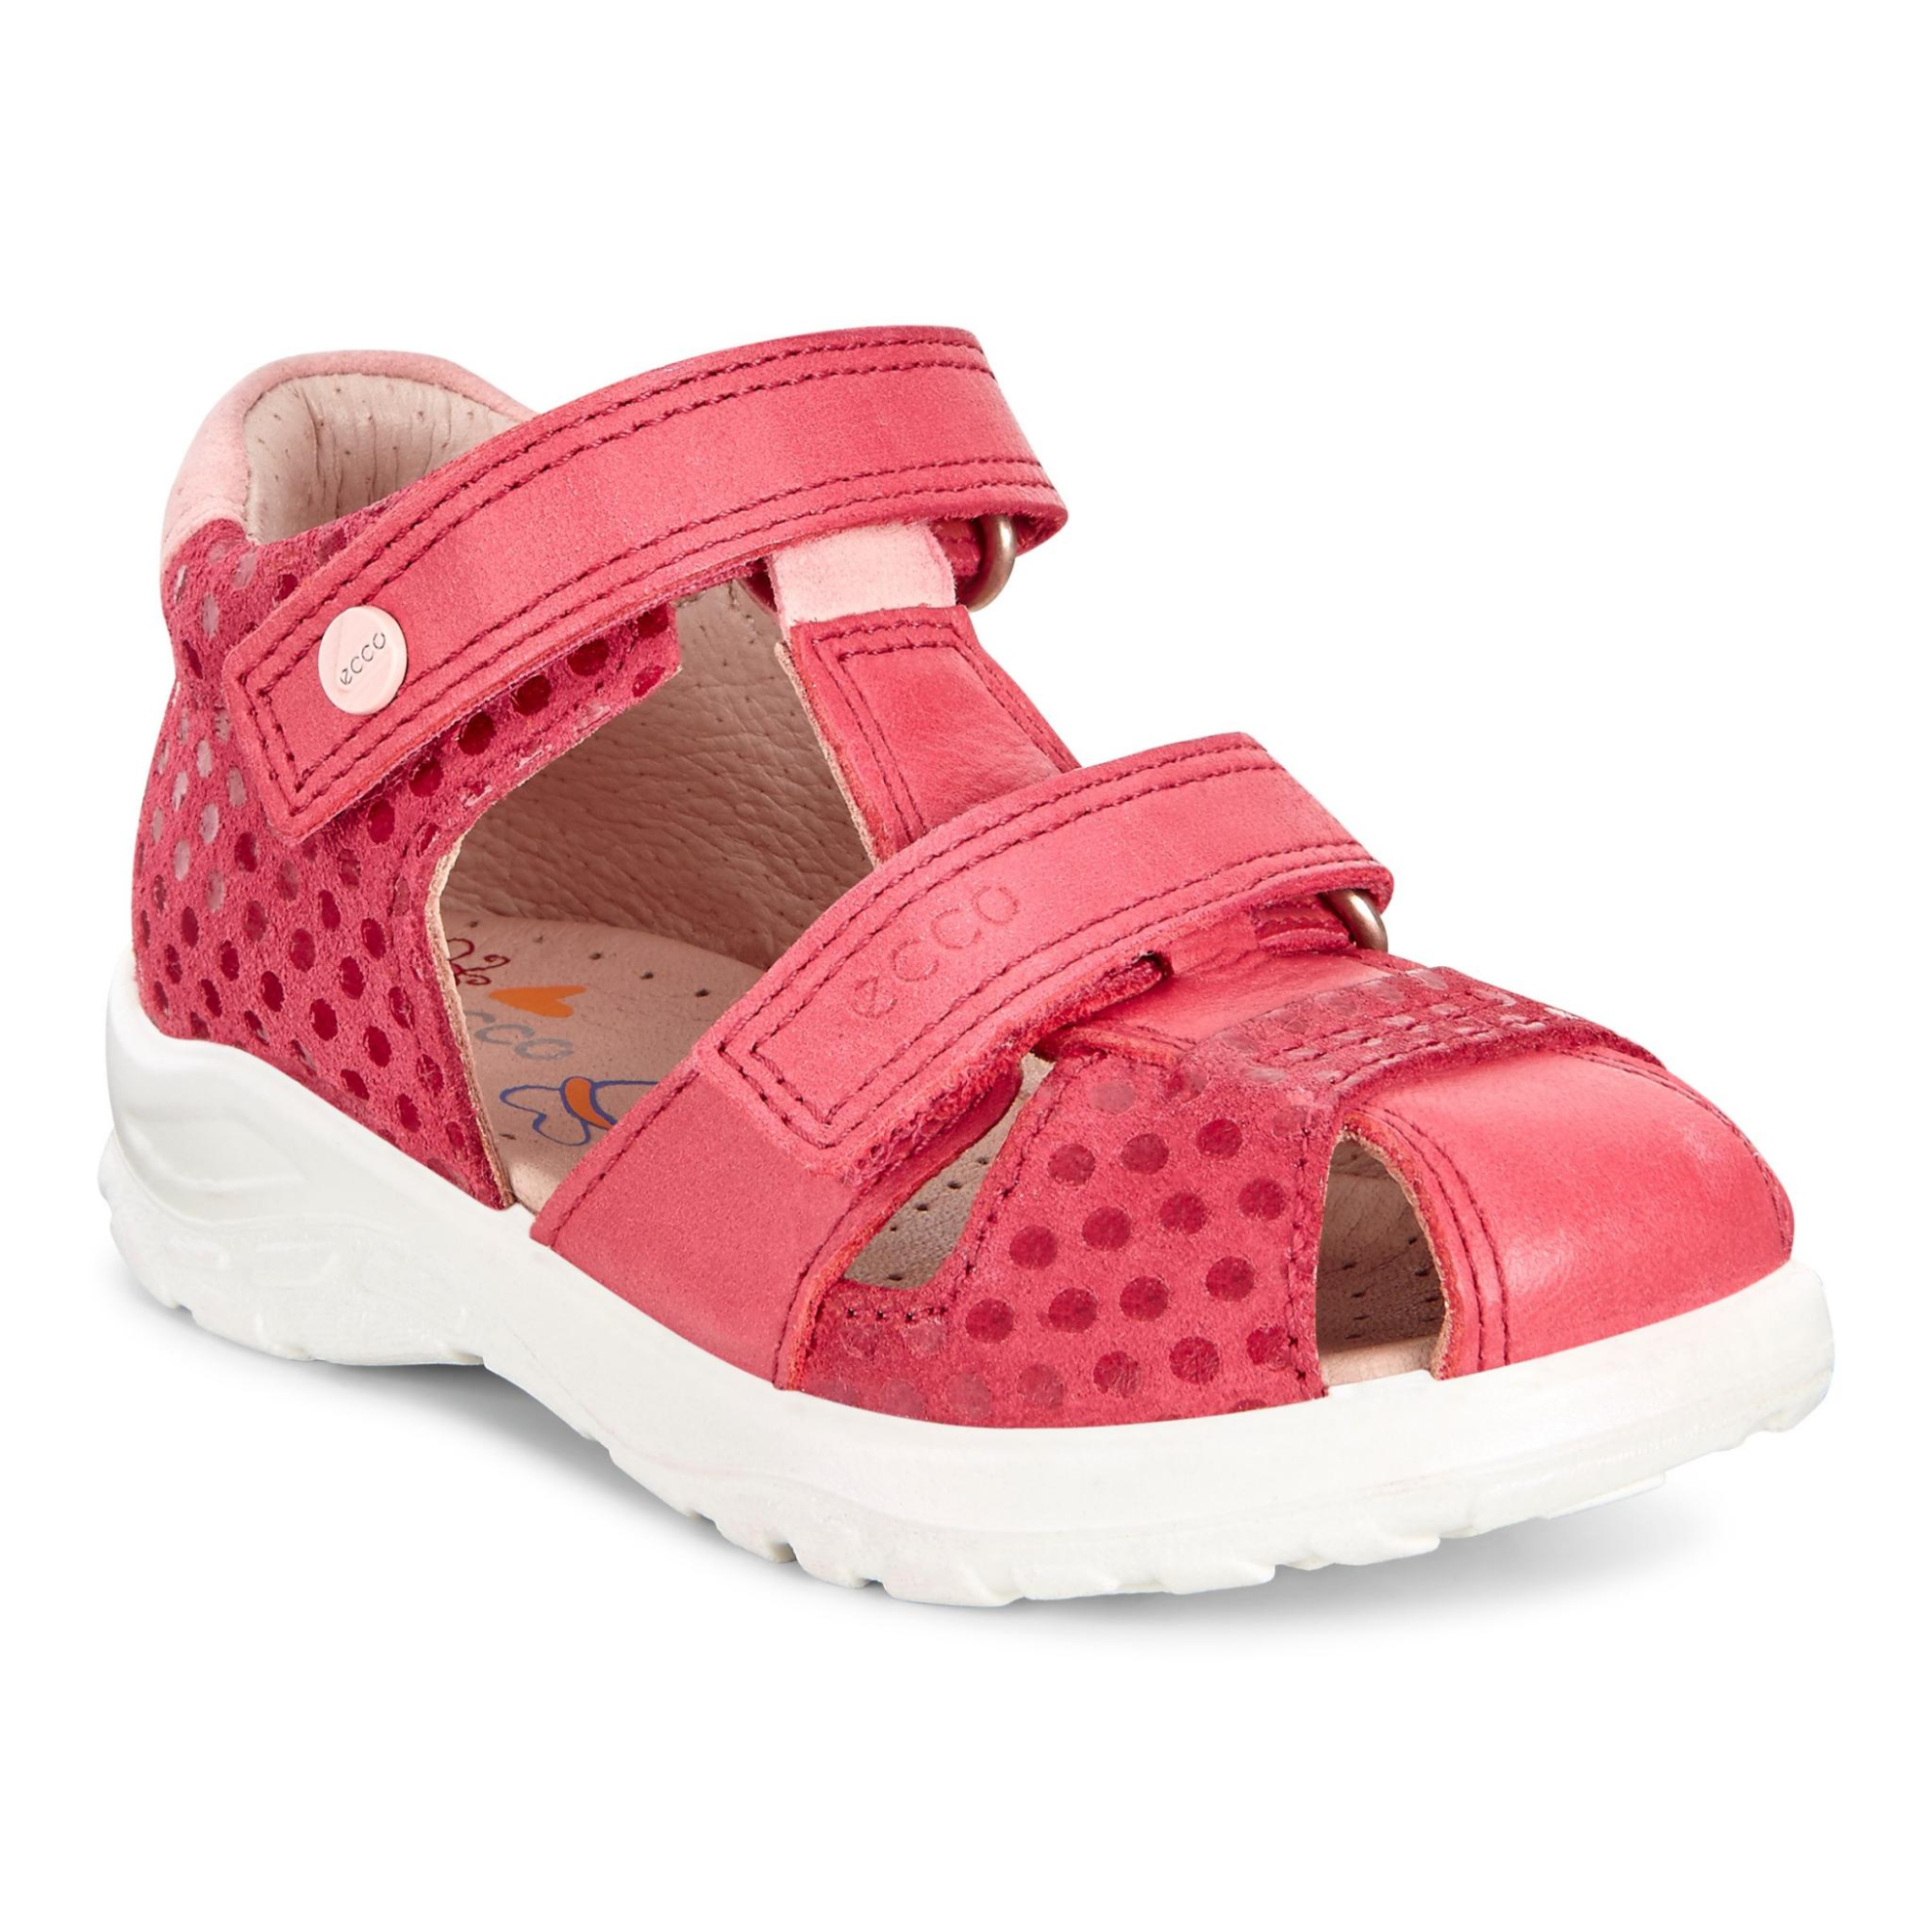 Ecco Peekaboo 23 - Products - Veryk Mall - Veryk Mall, many product, quick response, safe your money!